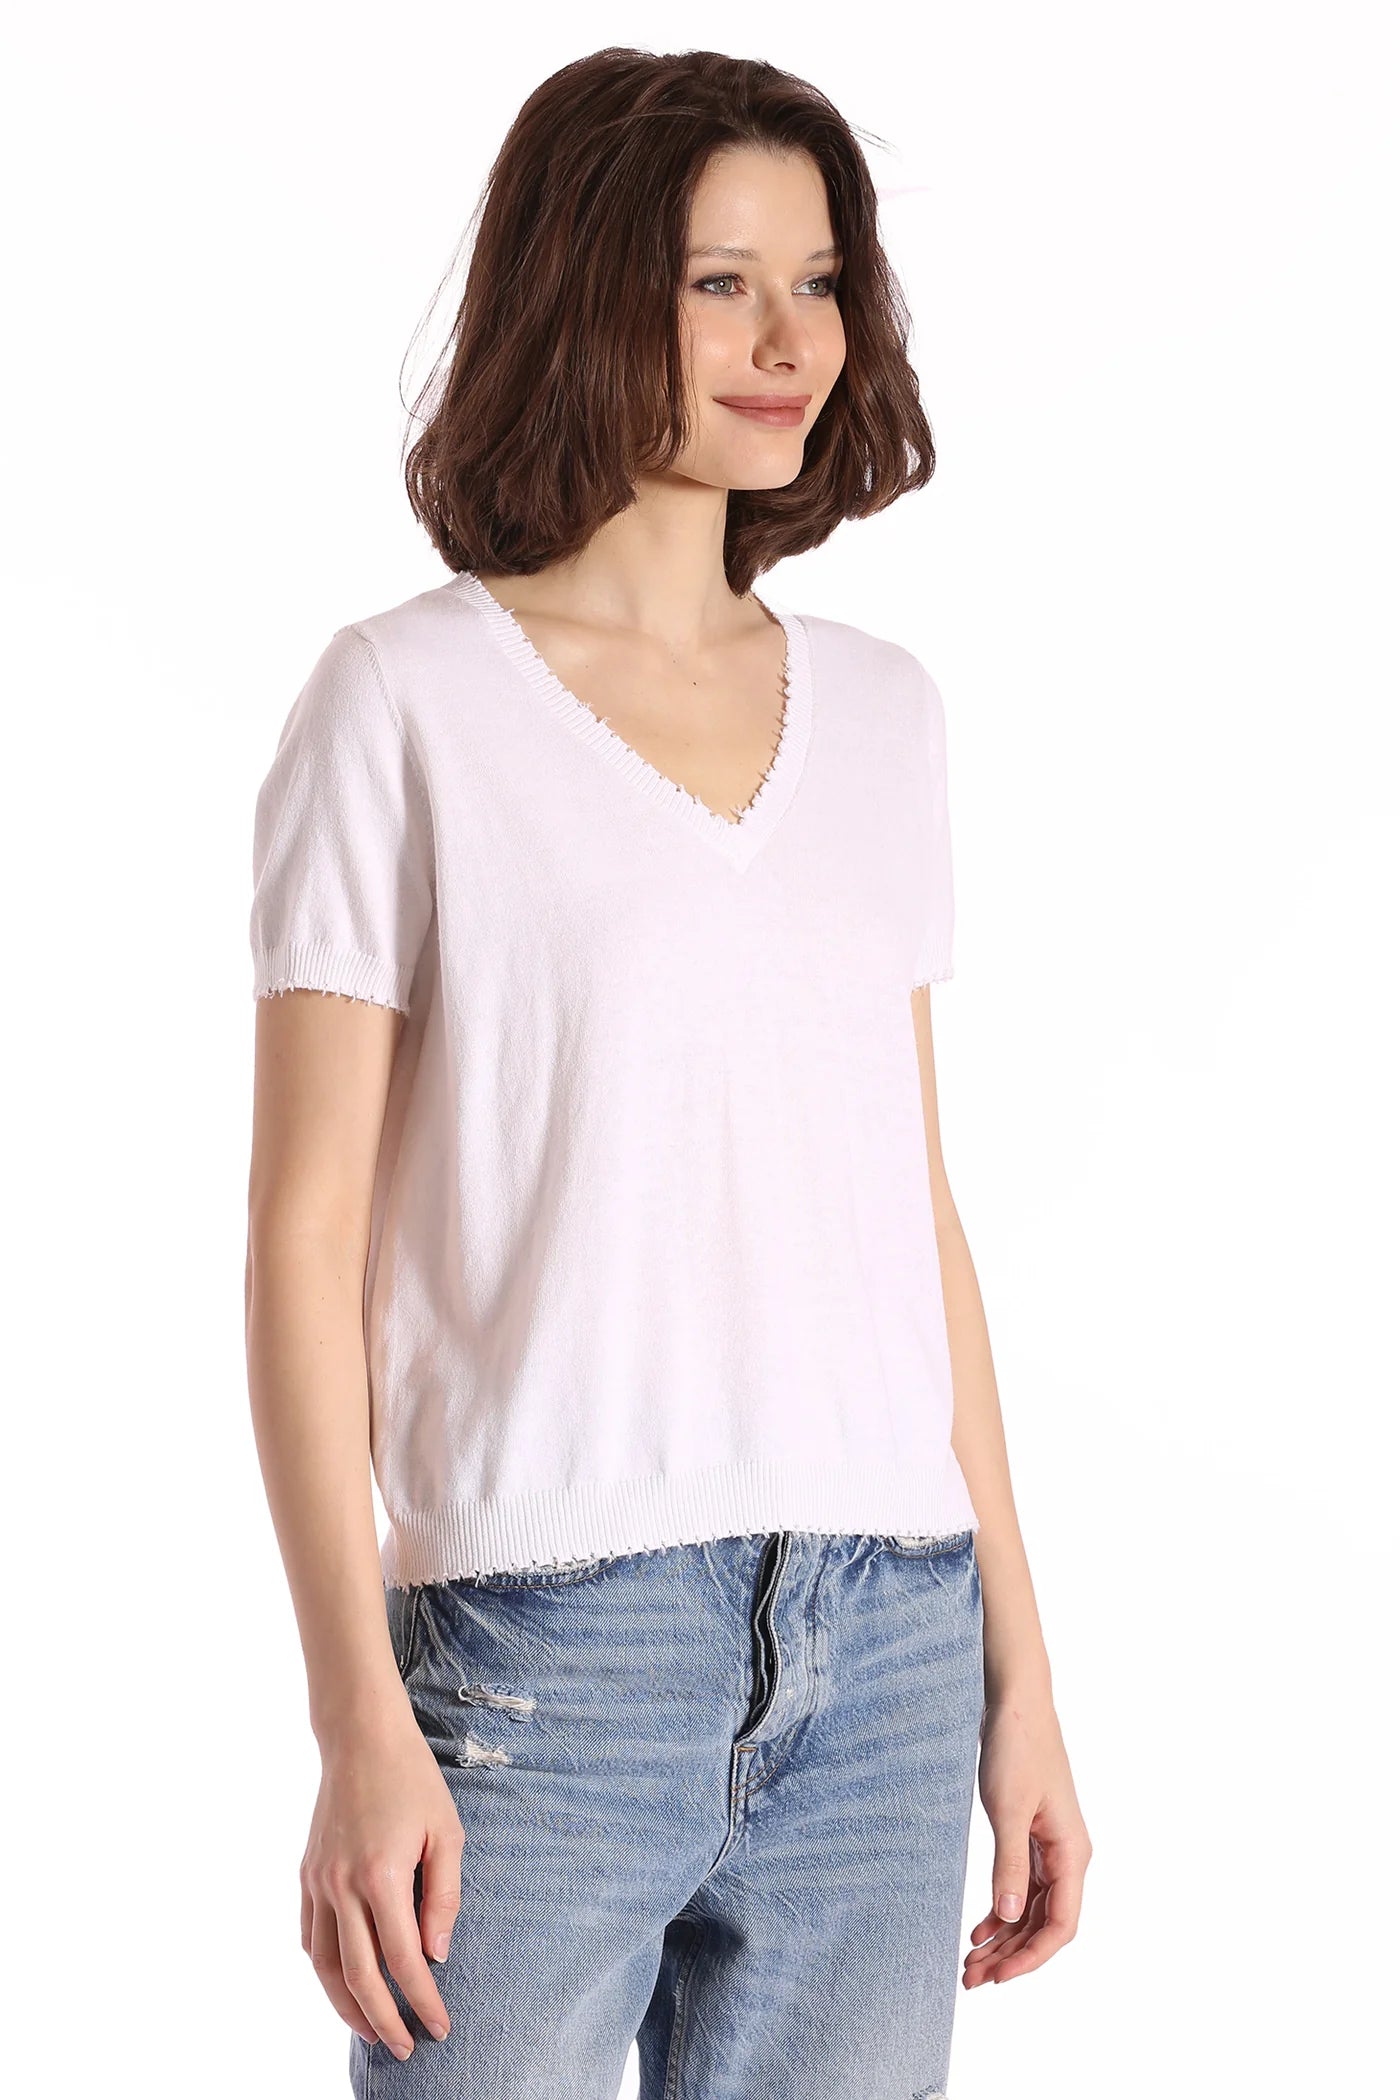 COTTON CASHMERE FRAYED V TEE IN WHITE - Romi Boutique